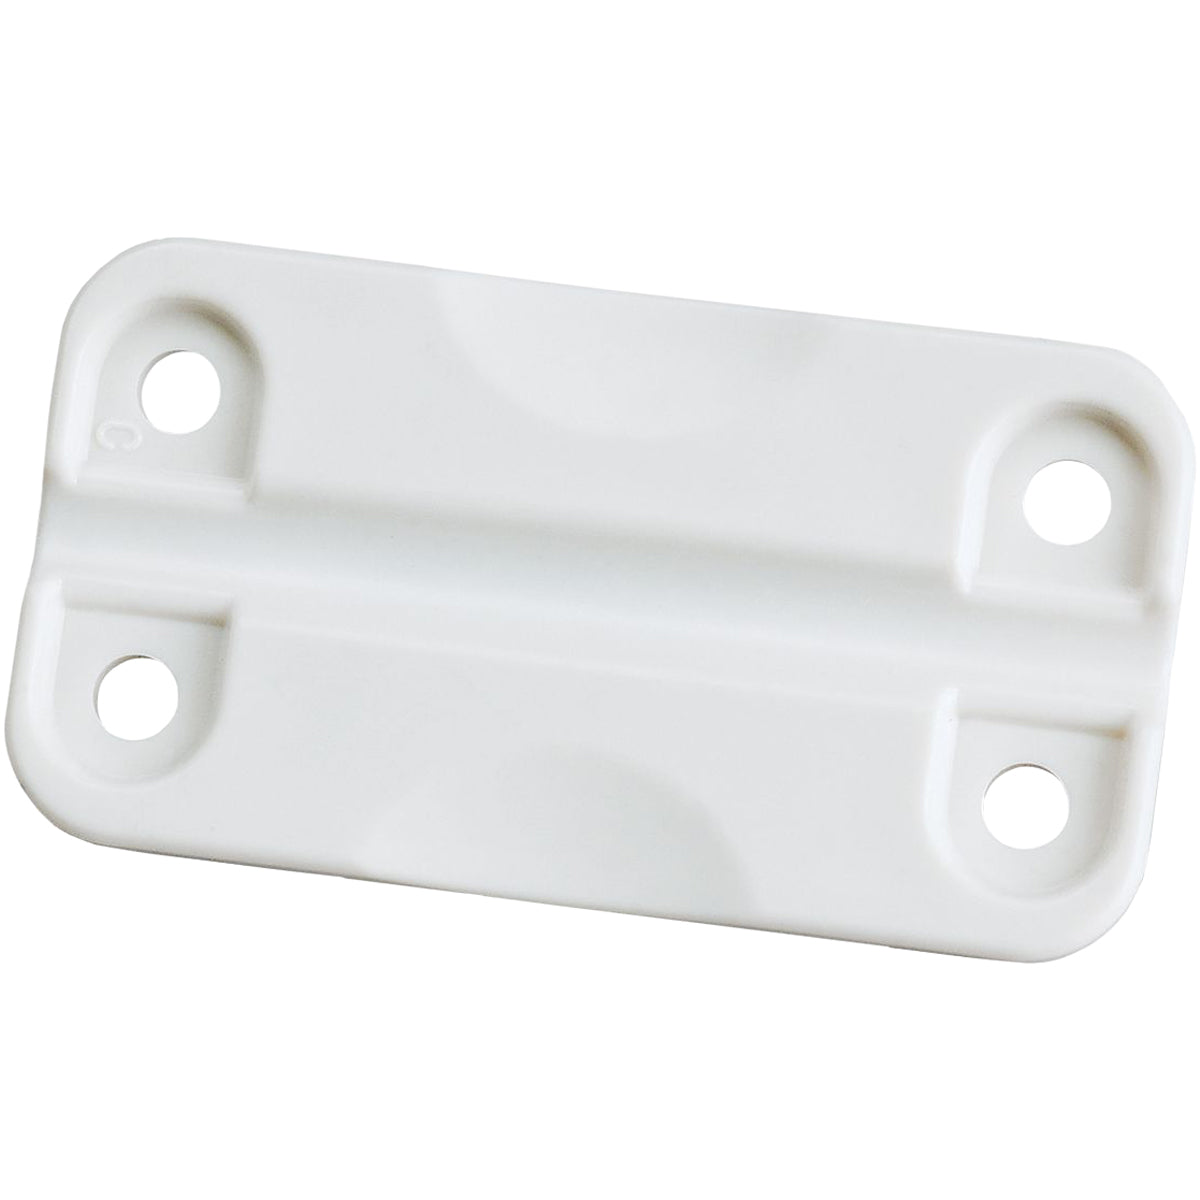 IGLOO Replacement Standard Plastic Cooler Hinges - White IGLOO